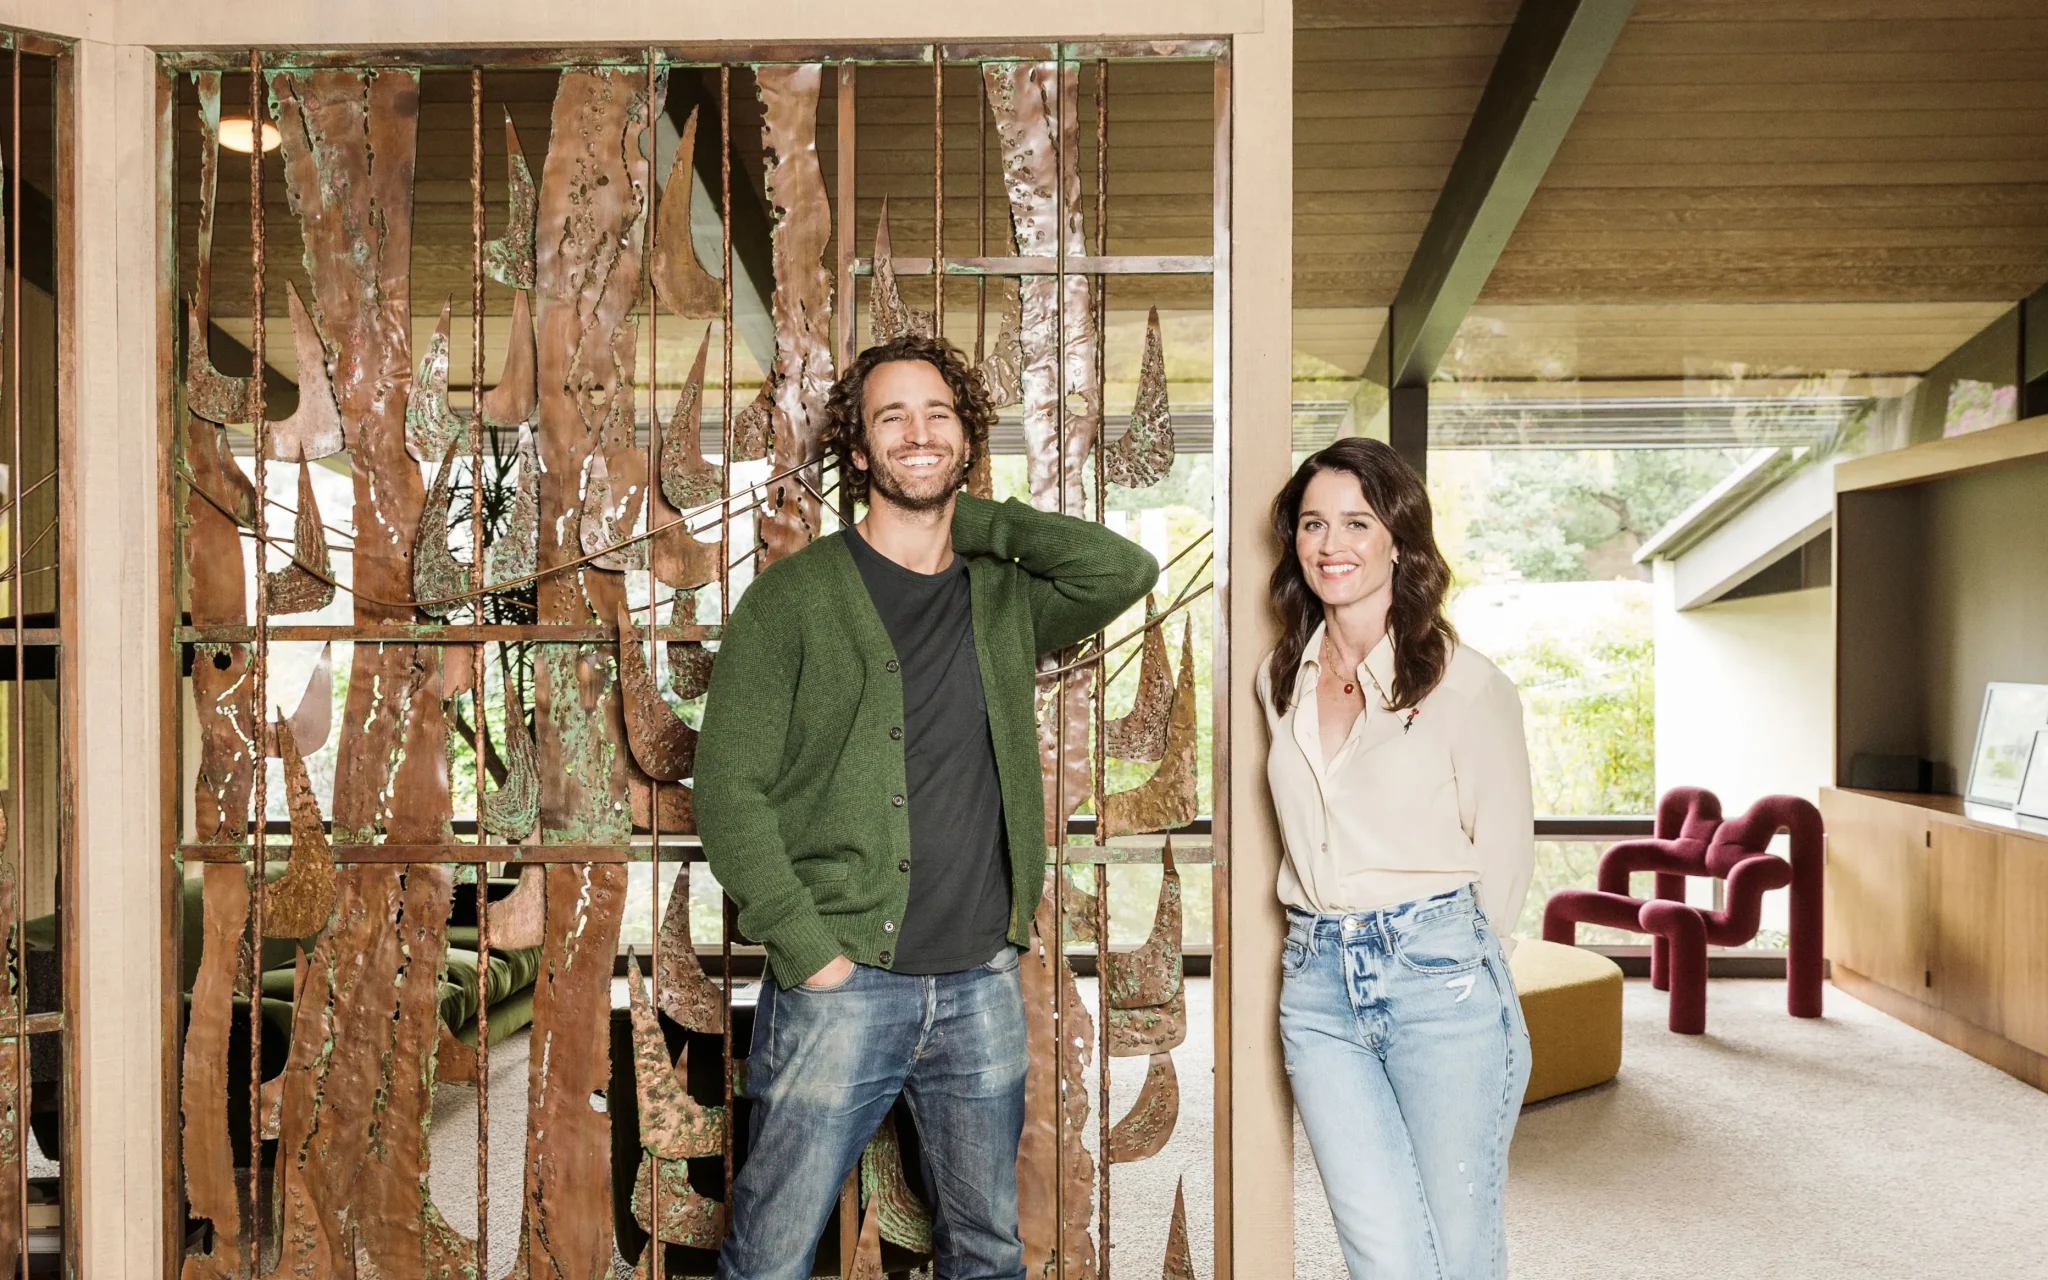 Actress Robin Tunney and partner Nicky Marmet